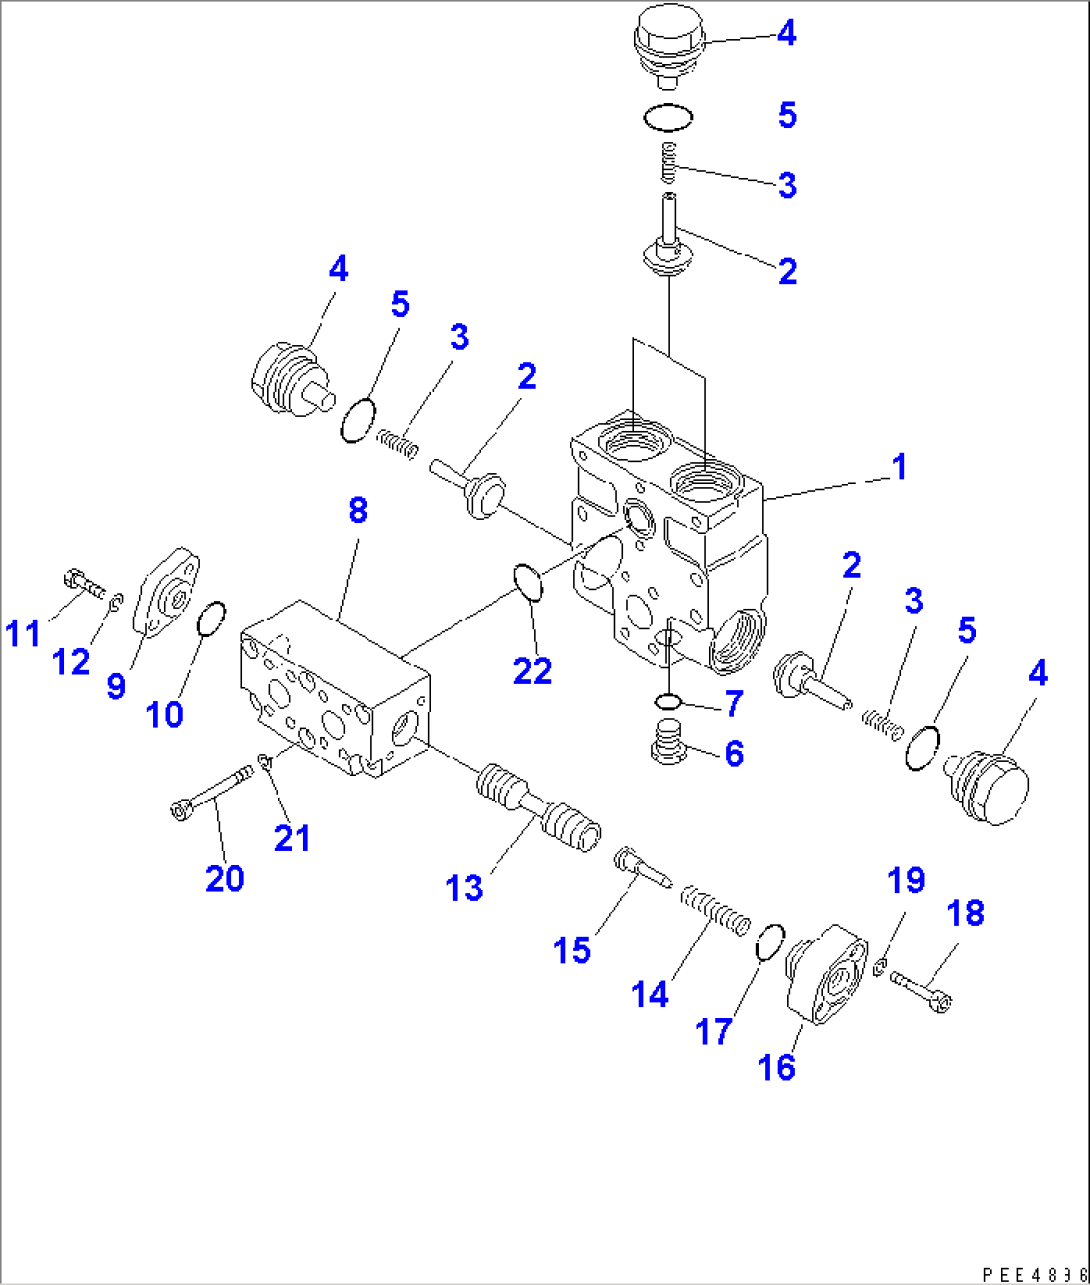 EMERGENCY STEERING (HYDRAULIC PIPING) (DIVITER VALVE INNER PARTS)(#50001-)